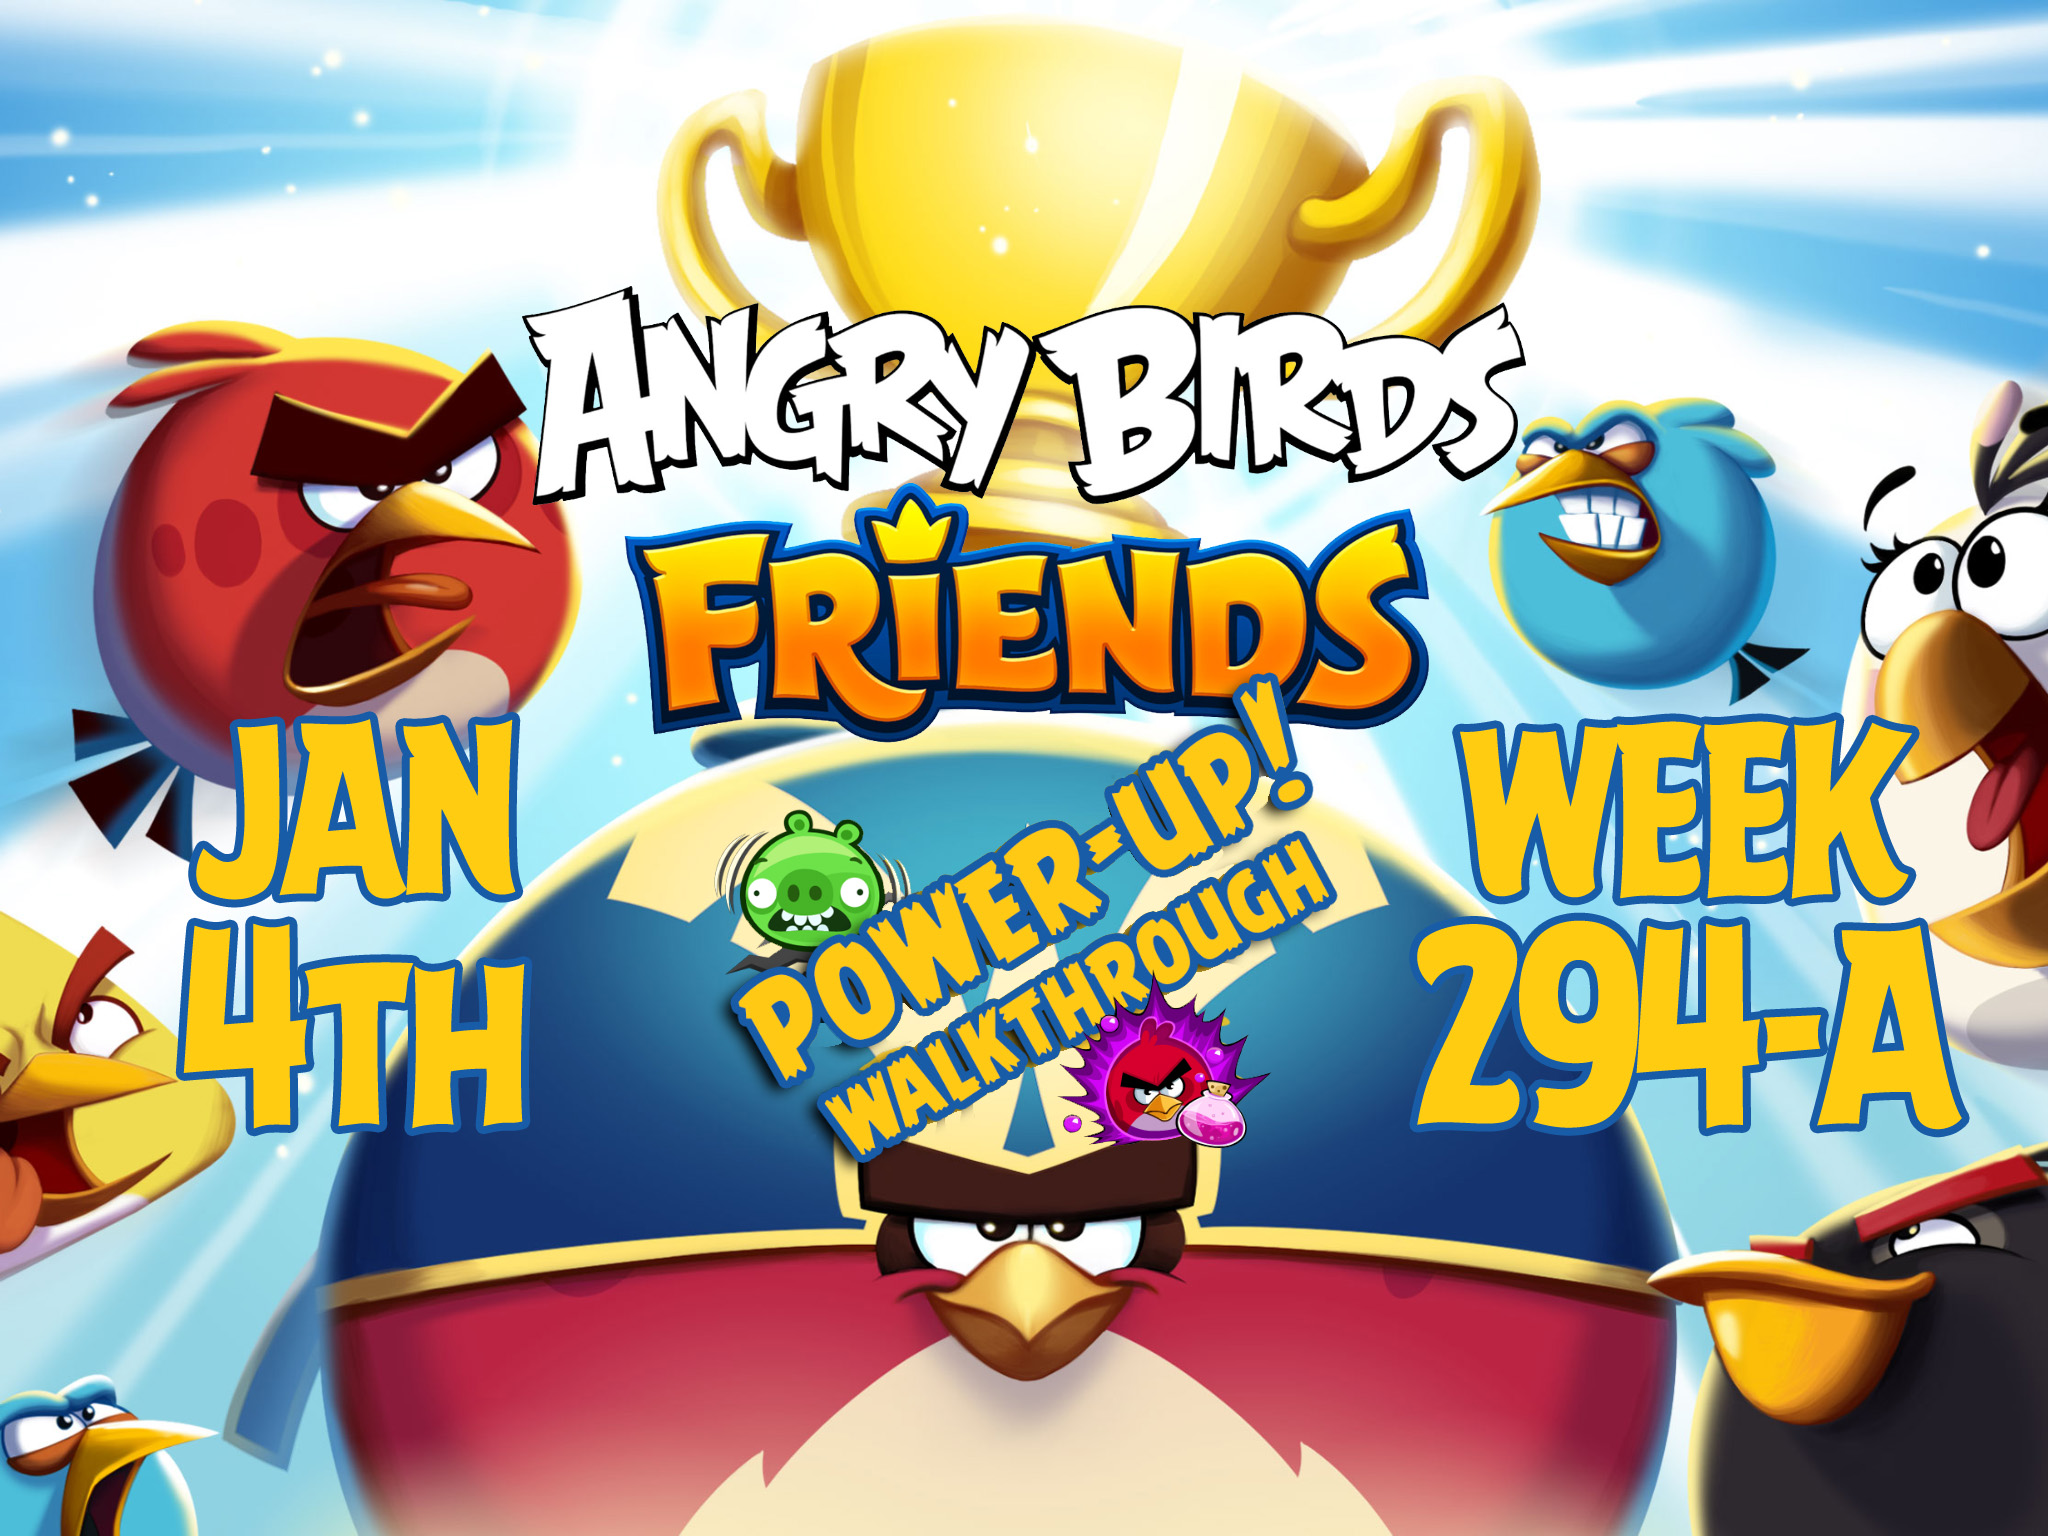 Angry Birds Friends Tournament Week 294-A Feature Image PU